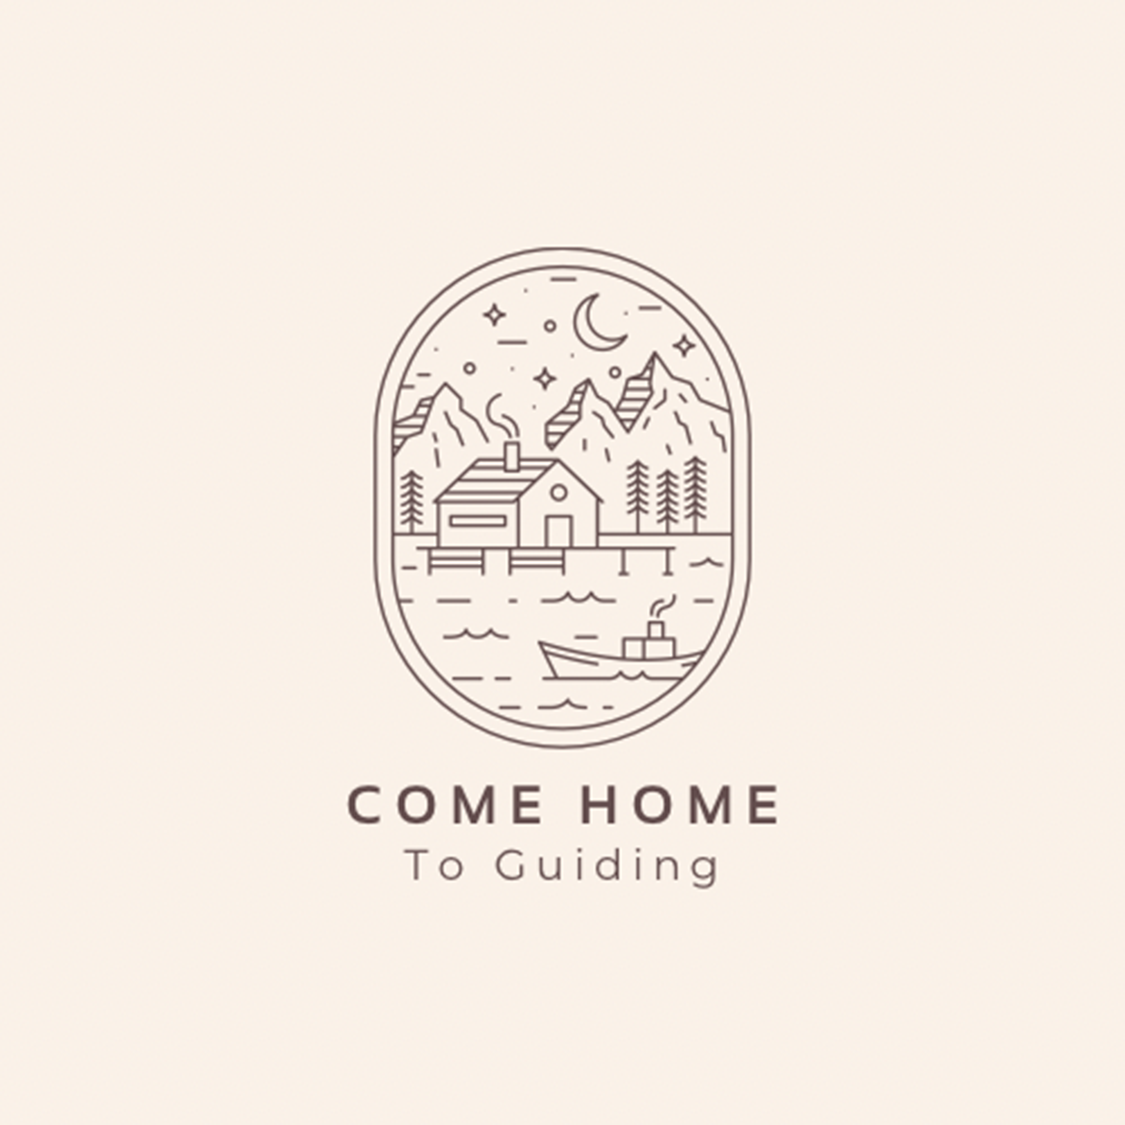 Come Home to Guiding graphic.